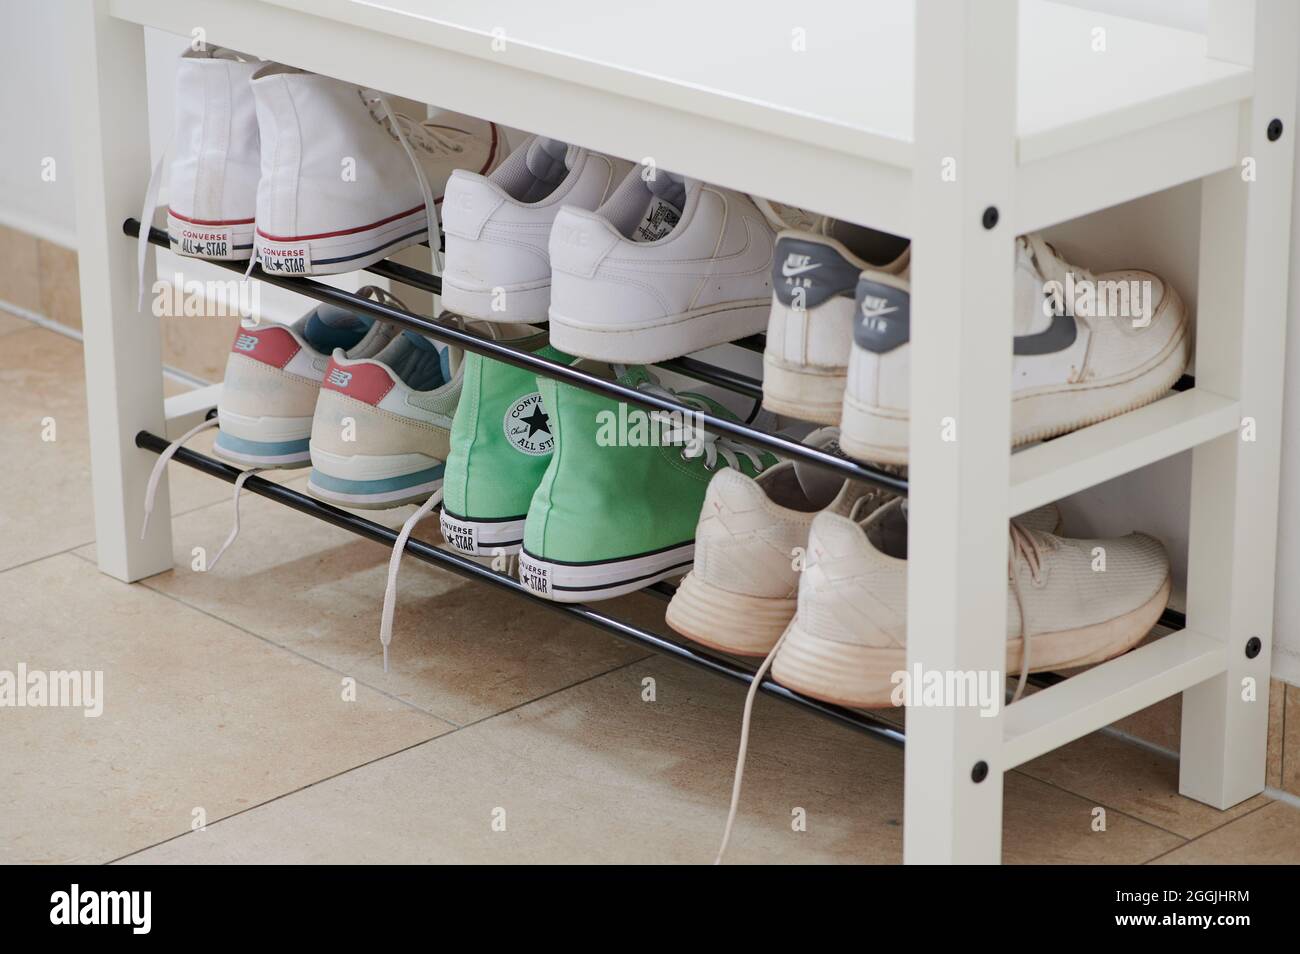 Mainz, Germany May 22, 2021 Sports Shoes With Nike And Converse Of A Family  On The Shelf In The Hallway Stock Photo - Alamy